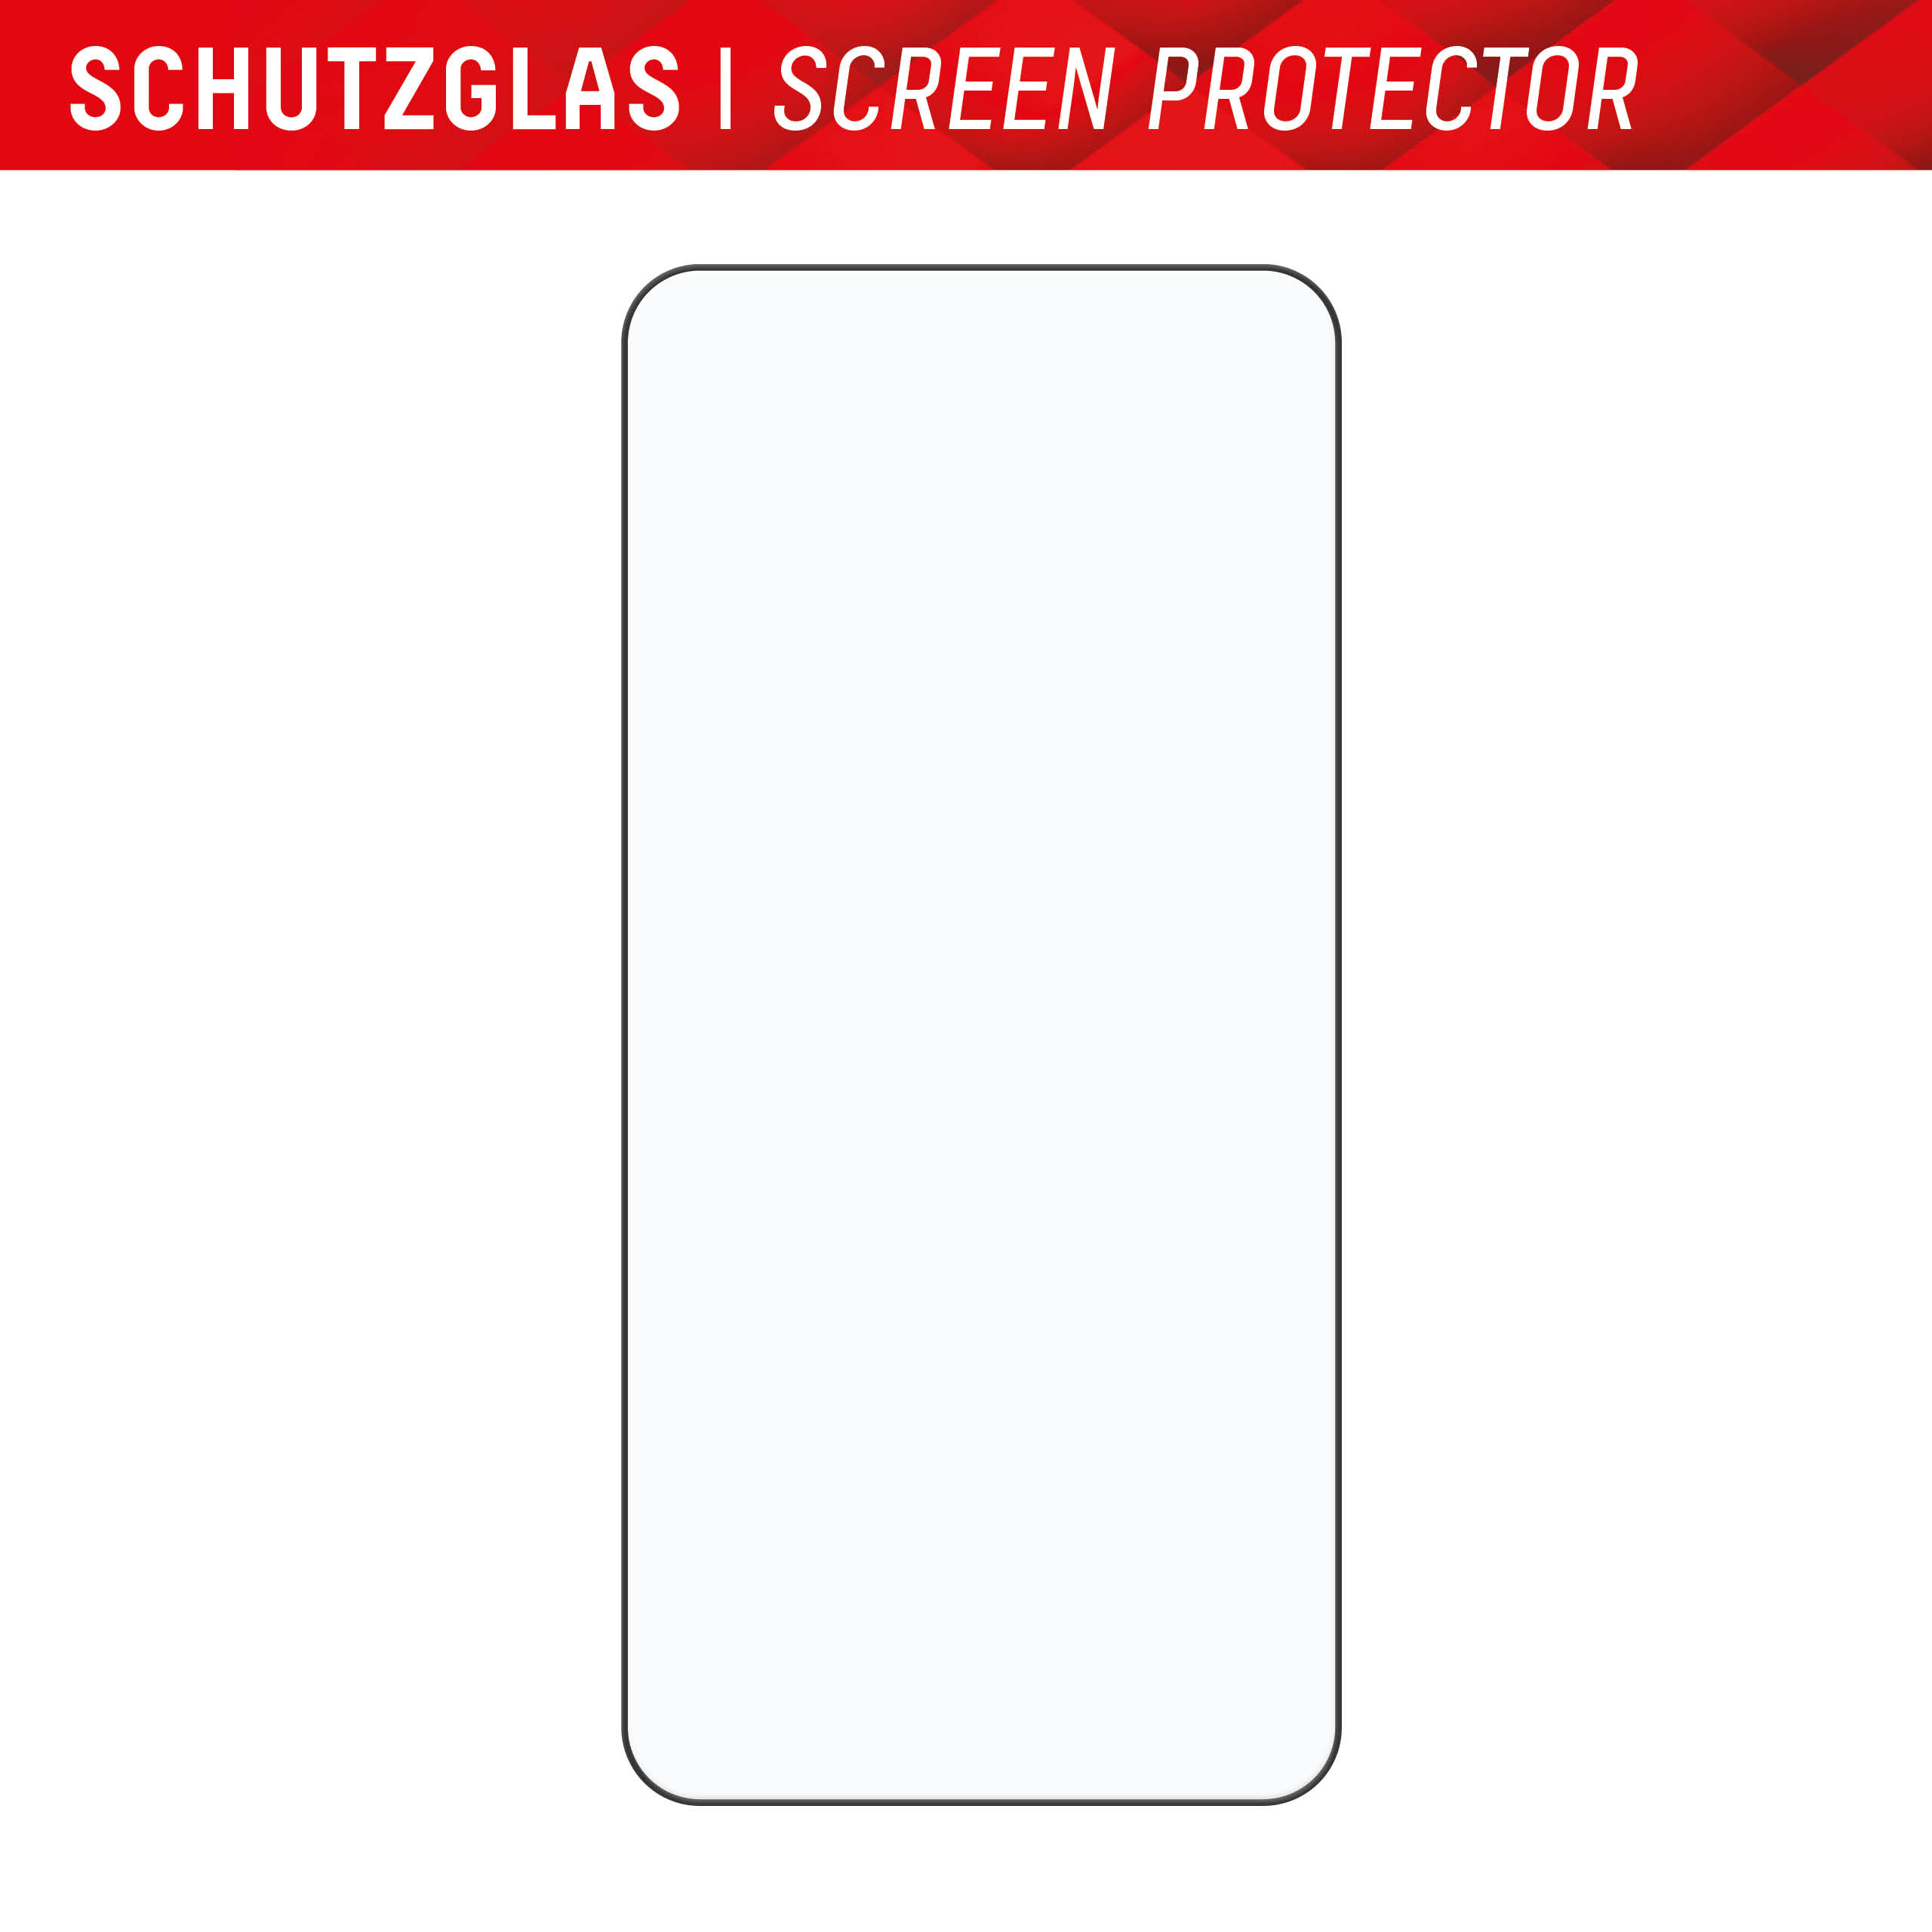 Samsung Galaxy S24 Full Cover Screen Protector